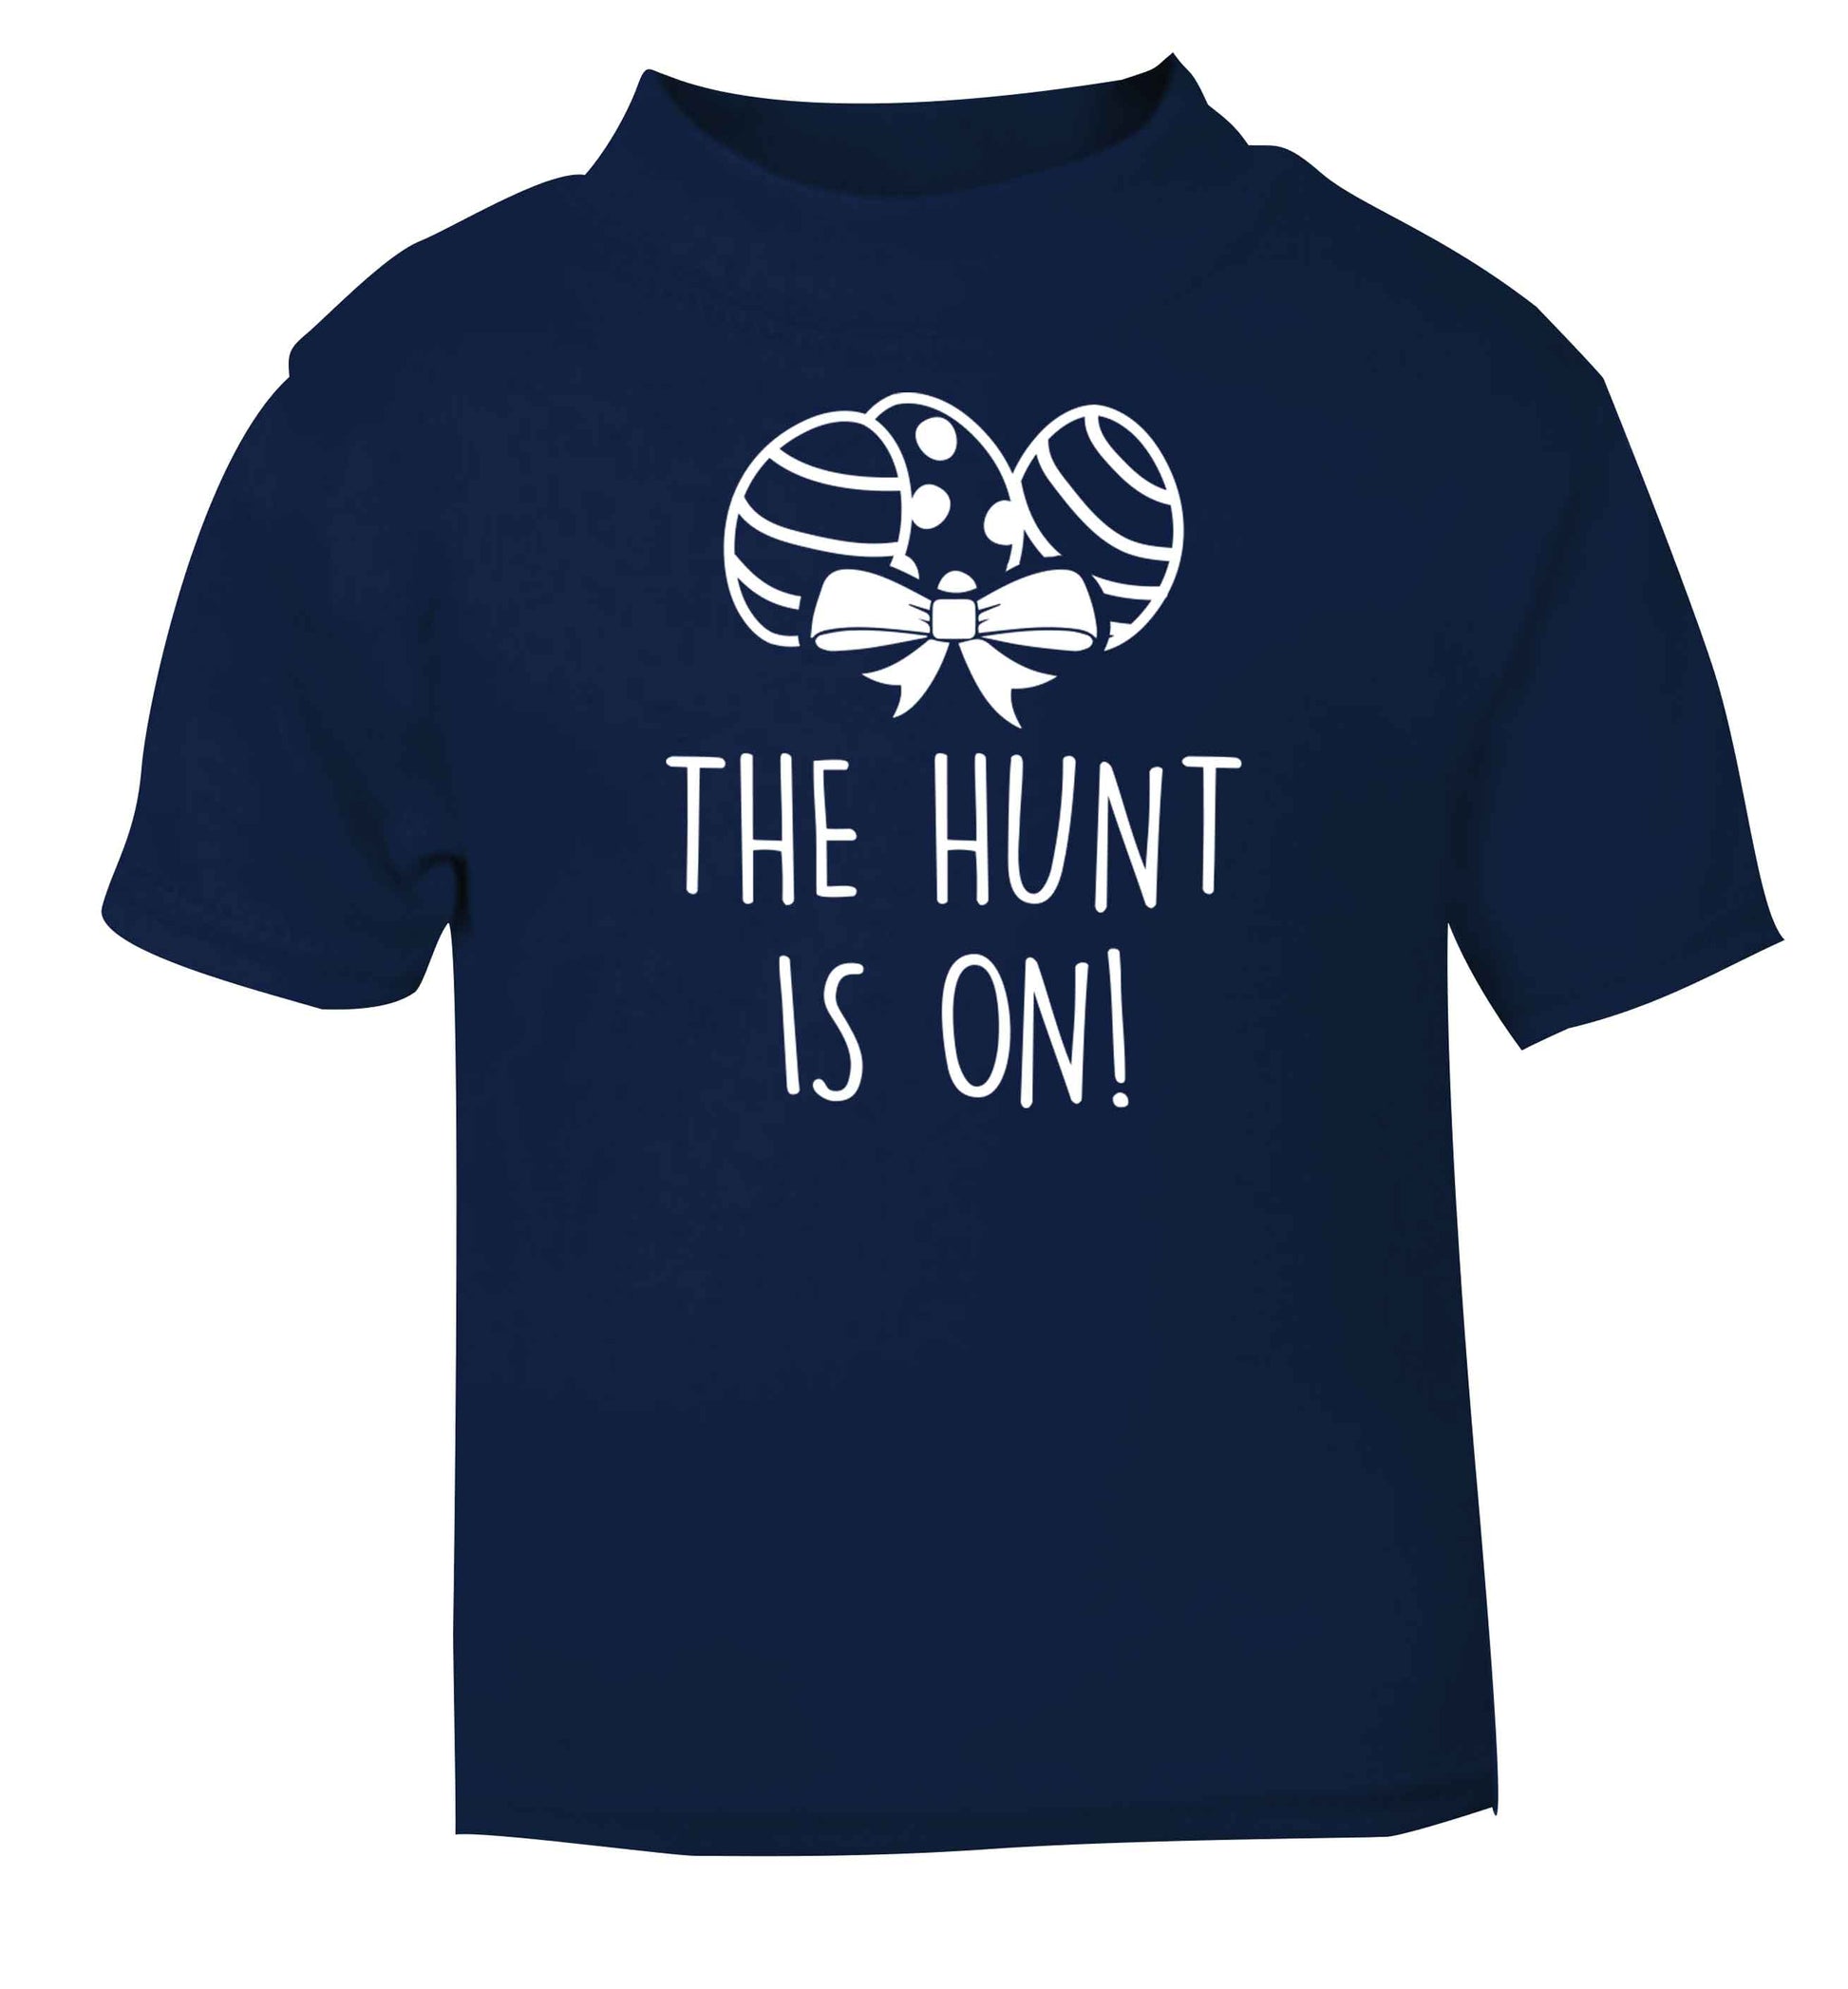 The hunt is on navy baby toddler Tshirt 2 Years